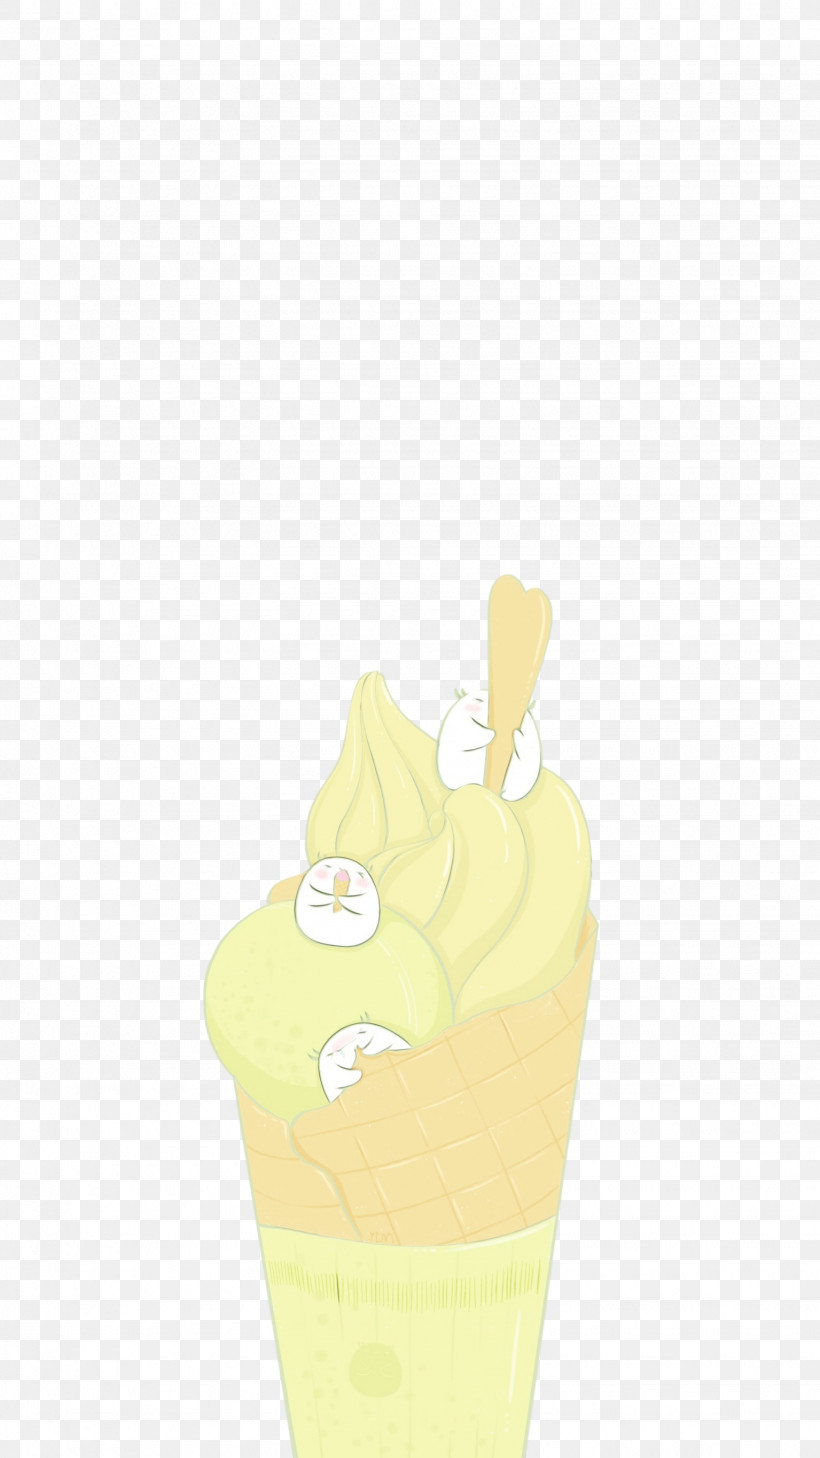 Ice Cream Cone Dairy Product Irish Cream Flavor Yellow, PNG, 1535x2731px, Watercolor, Cone, Dairy, Dairy Product, Flavor Download Free